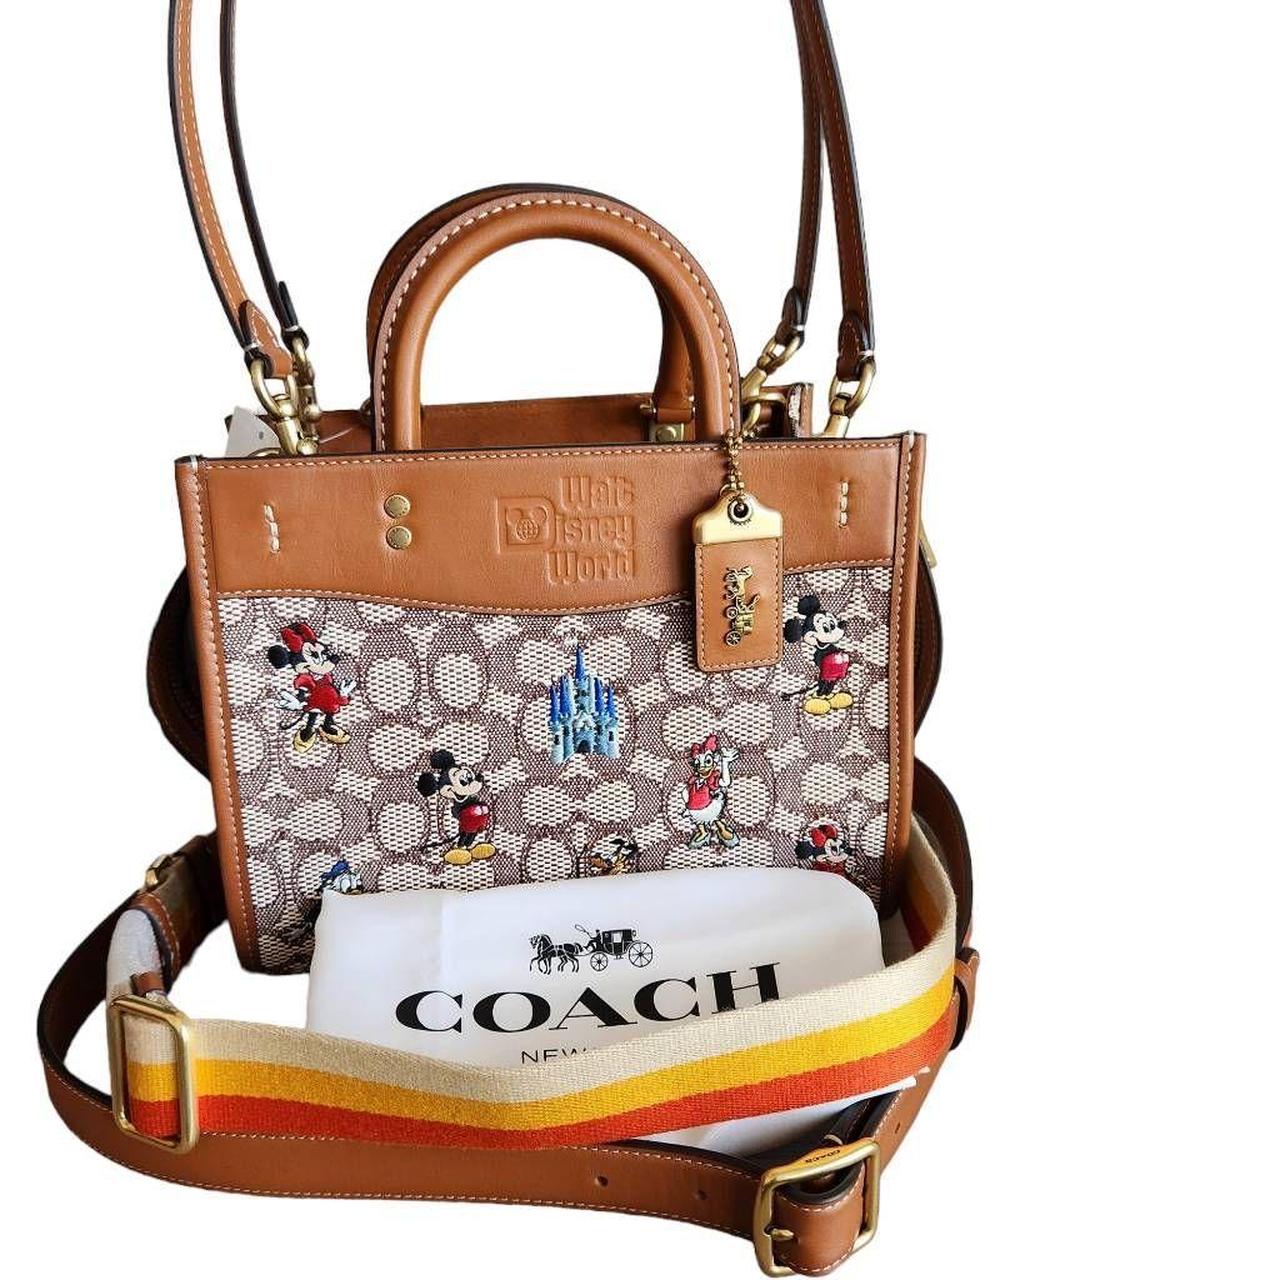 Disney x Coach Mini Bennett in Black Smooth Leather with Mickey Mouse –  Essex Fashion House